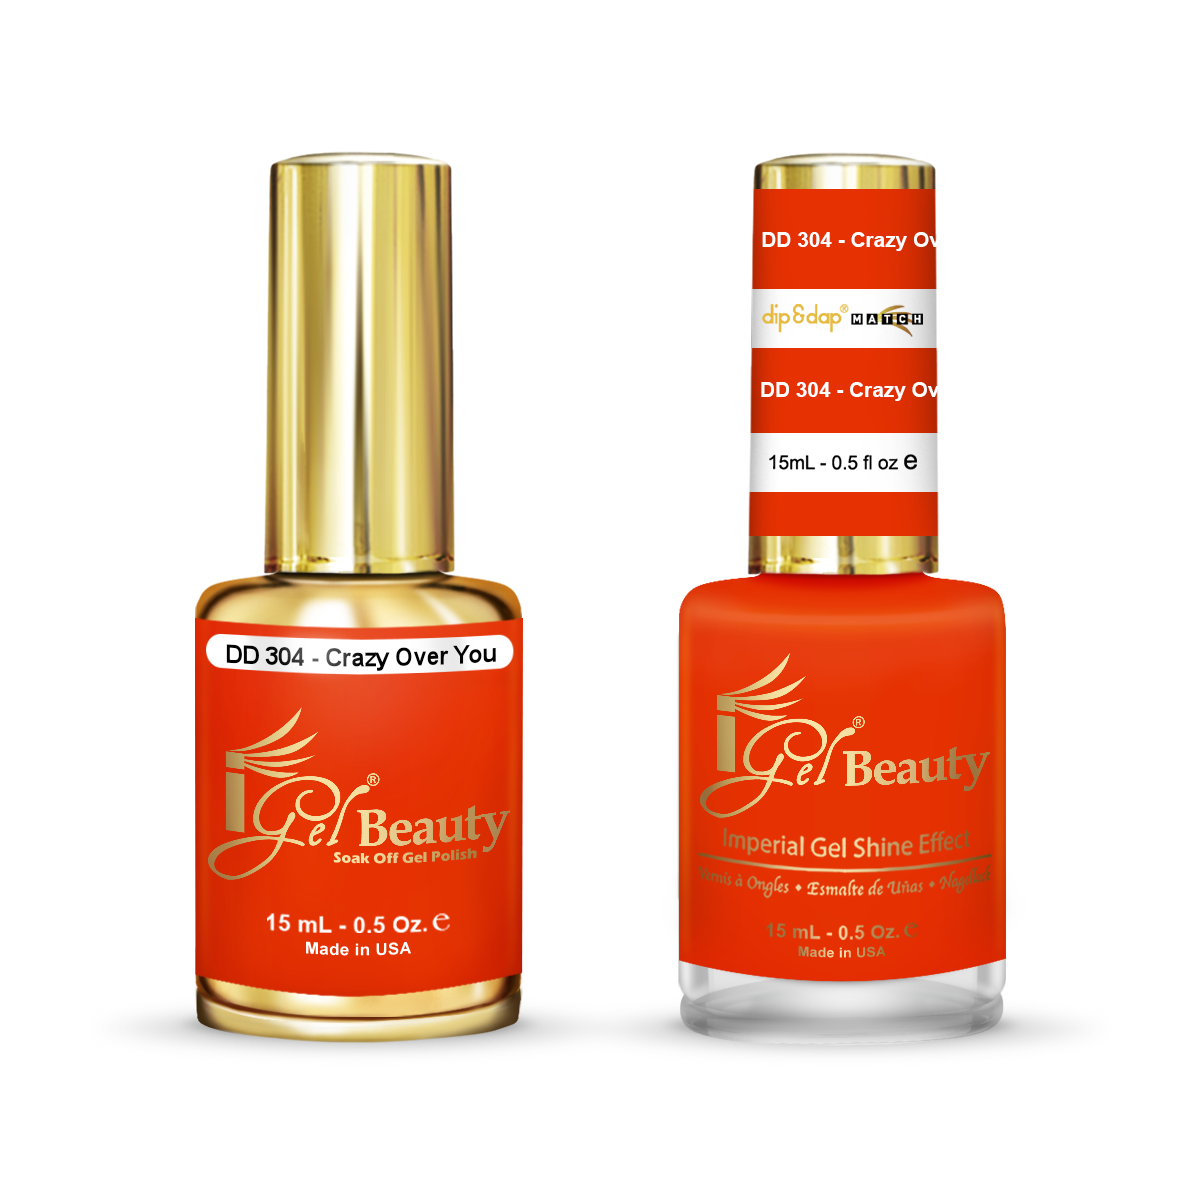 DD304 Crazy Over You Gel and Polish Duo By IGel Beauty